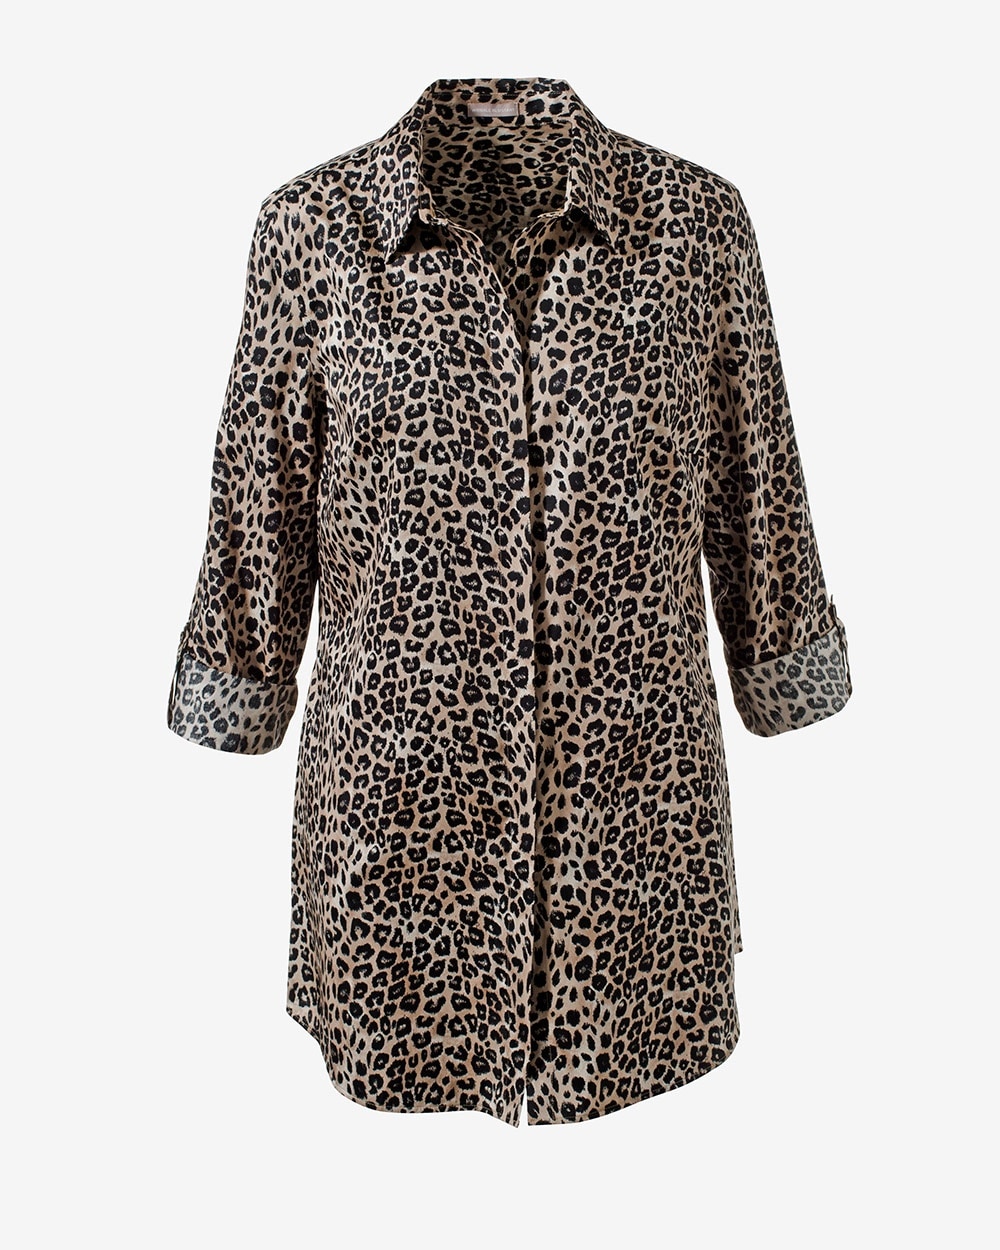 Wrinkle Resistant Another Animal Button-Up Top